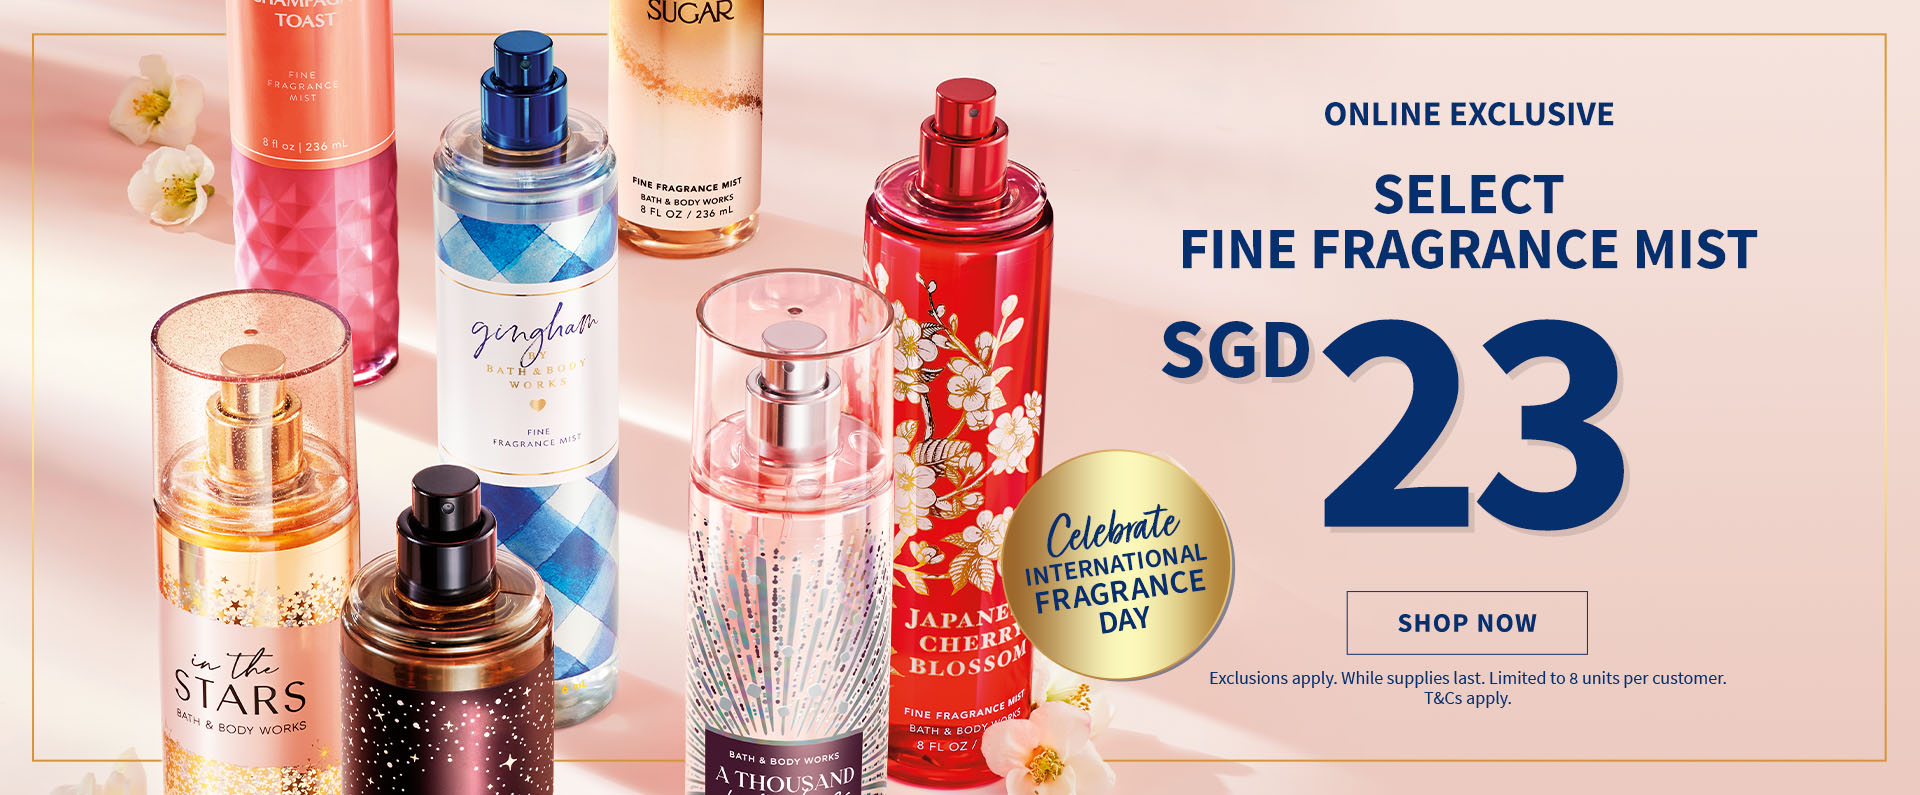 Limited Time Only! In Stores and Online Select Fine Fragrance Mist